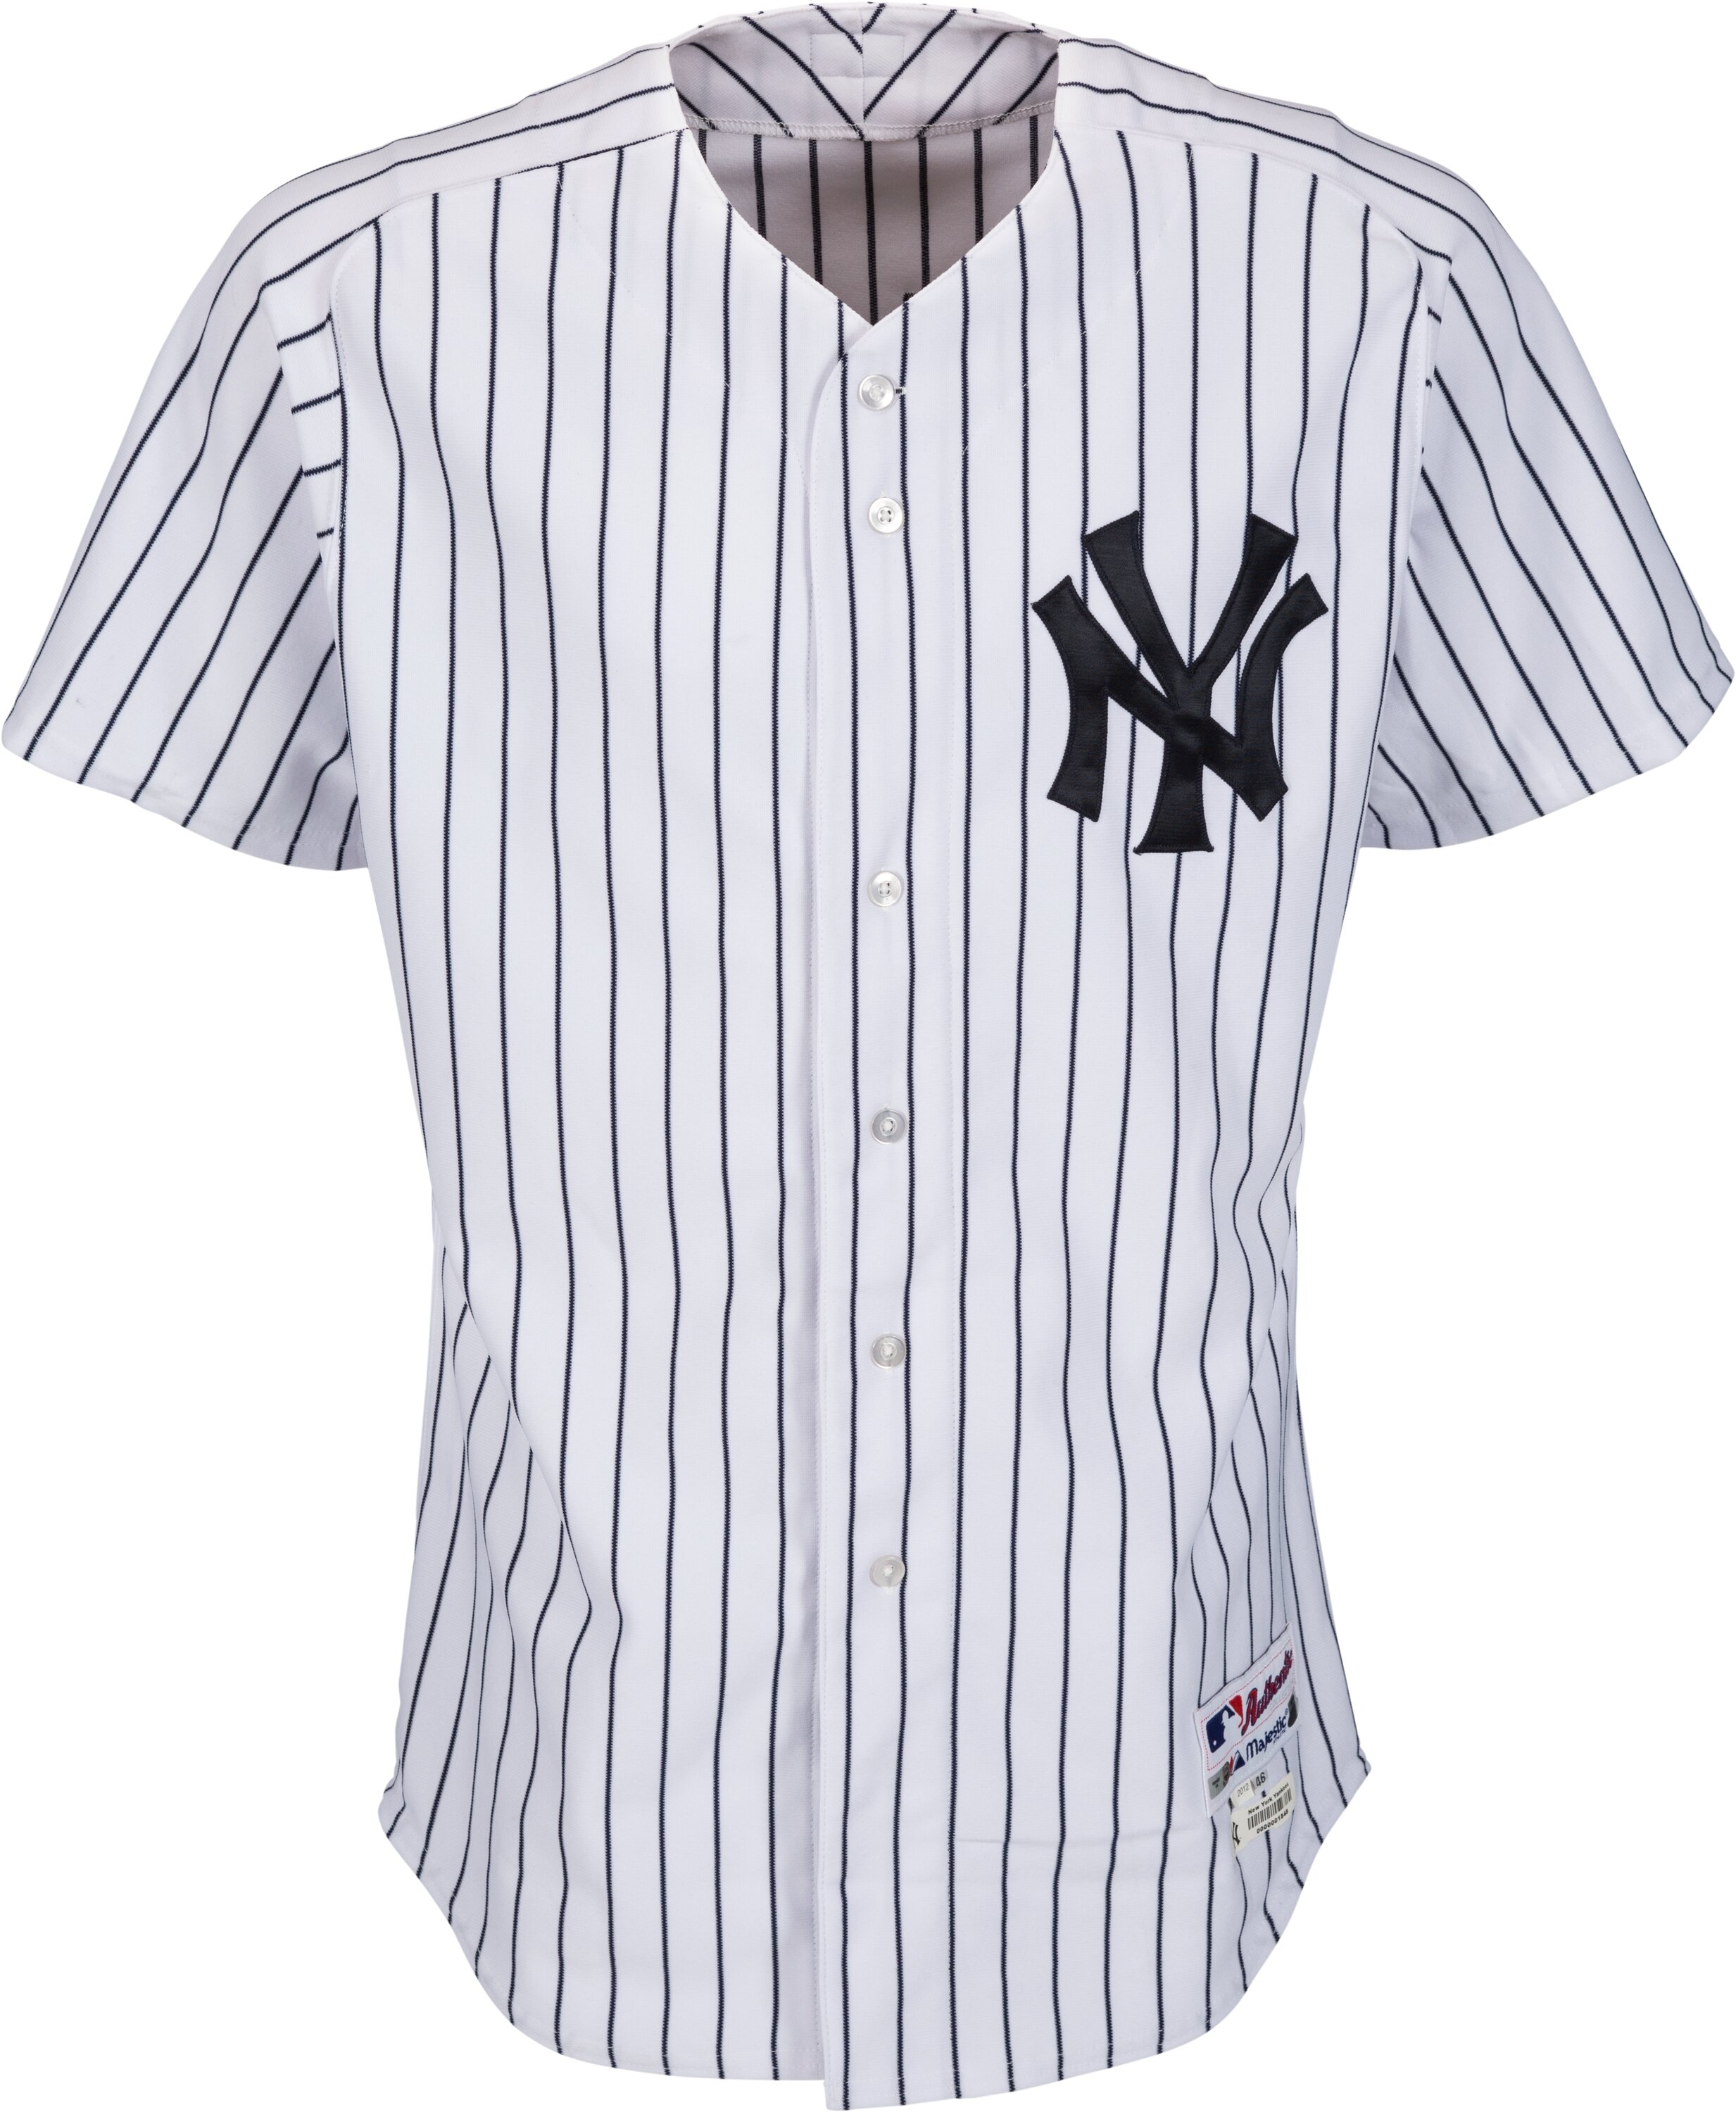 New York Yankees Mariano Rivera Signed & Inscribed Game Used 2012 Jersey  Steiner